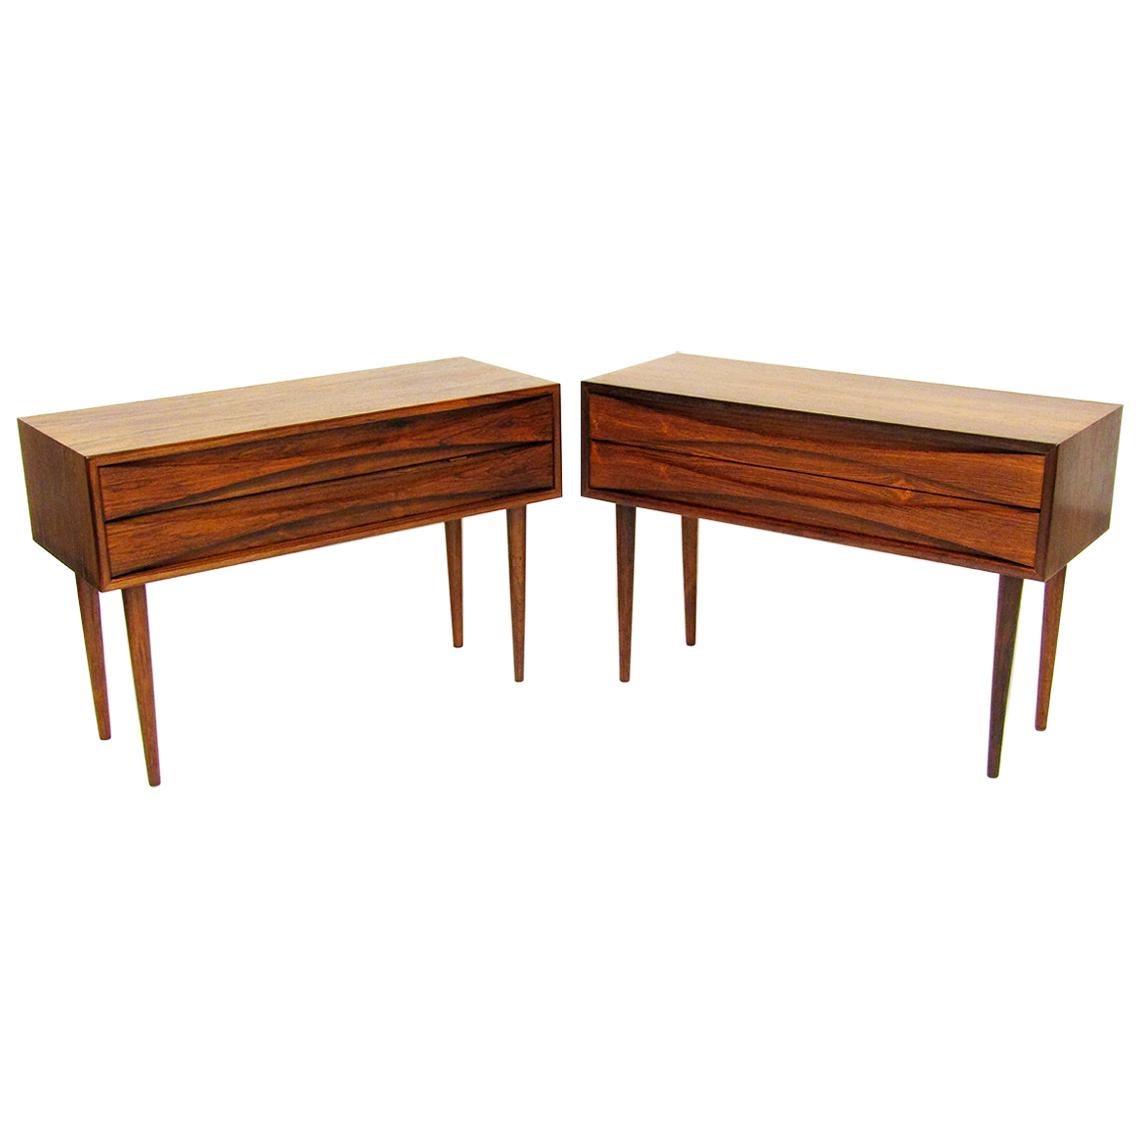 Pair of 1960s Danish Rosewood Side Table Nightstands by Niels Clausen